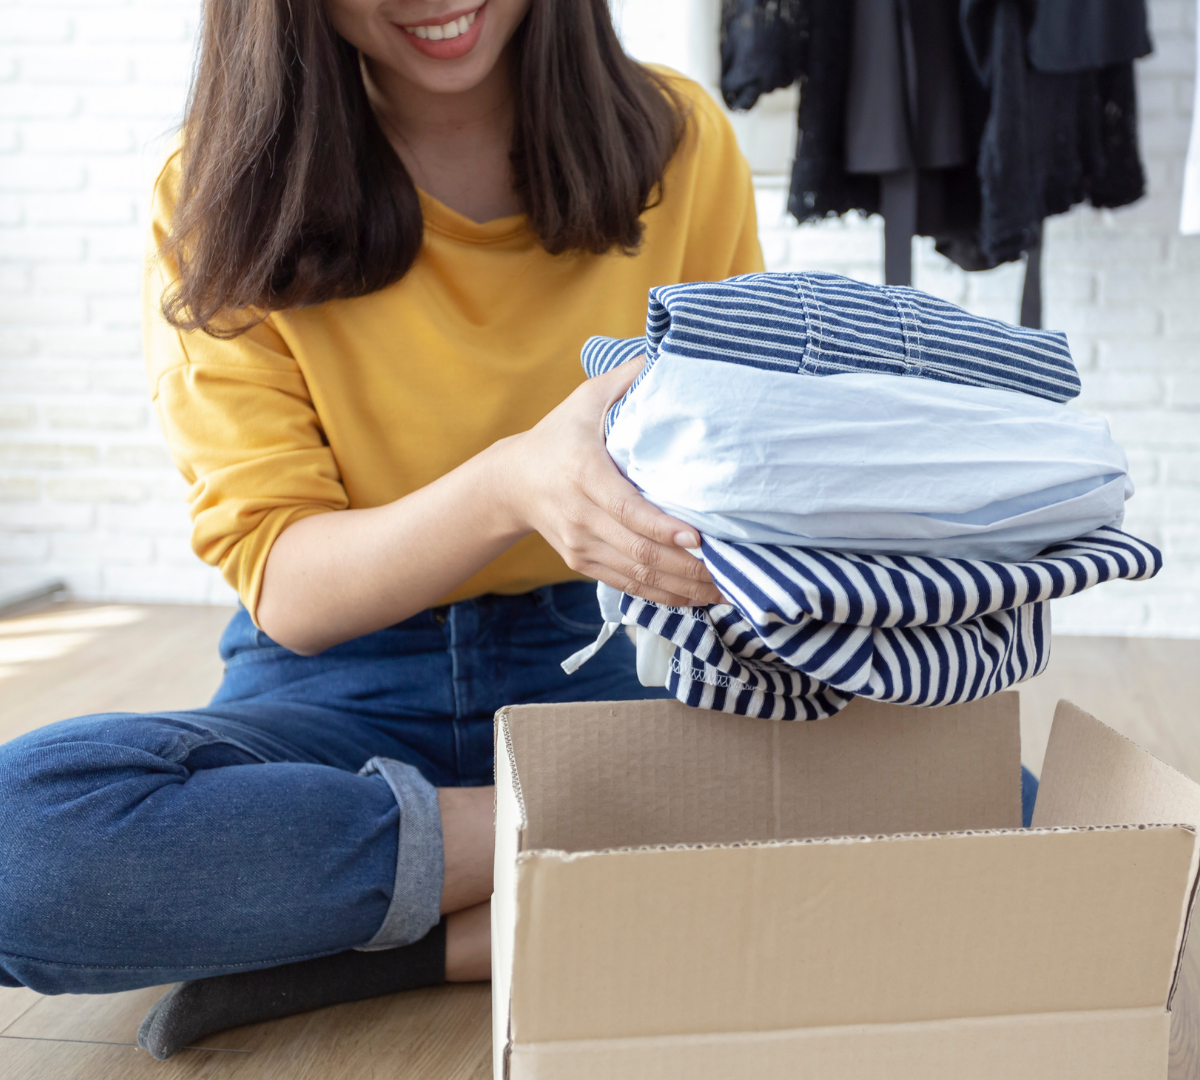 Woman putting clothes in boxes